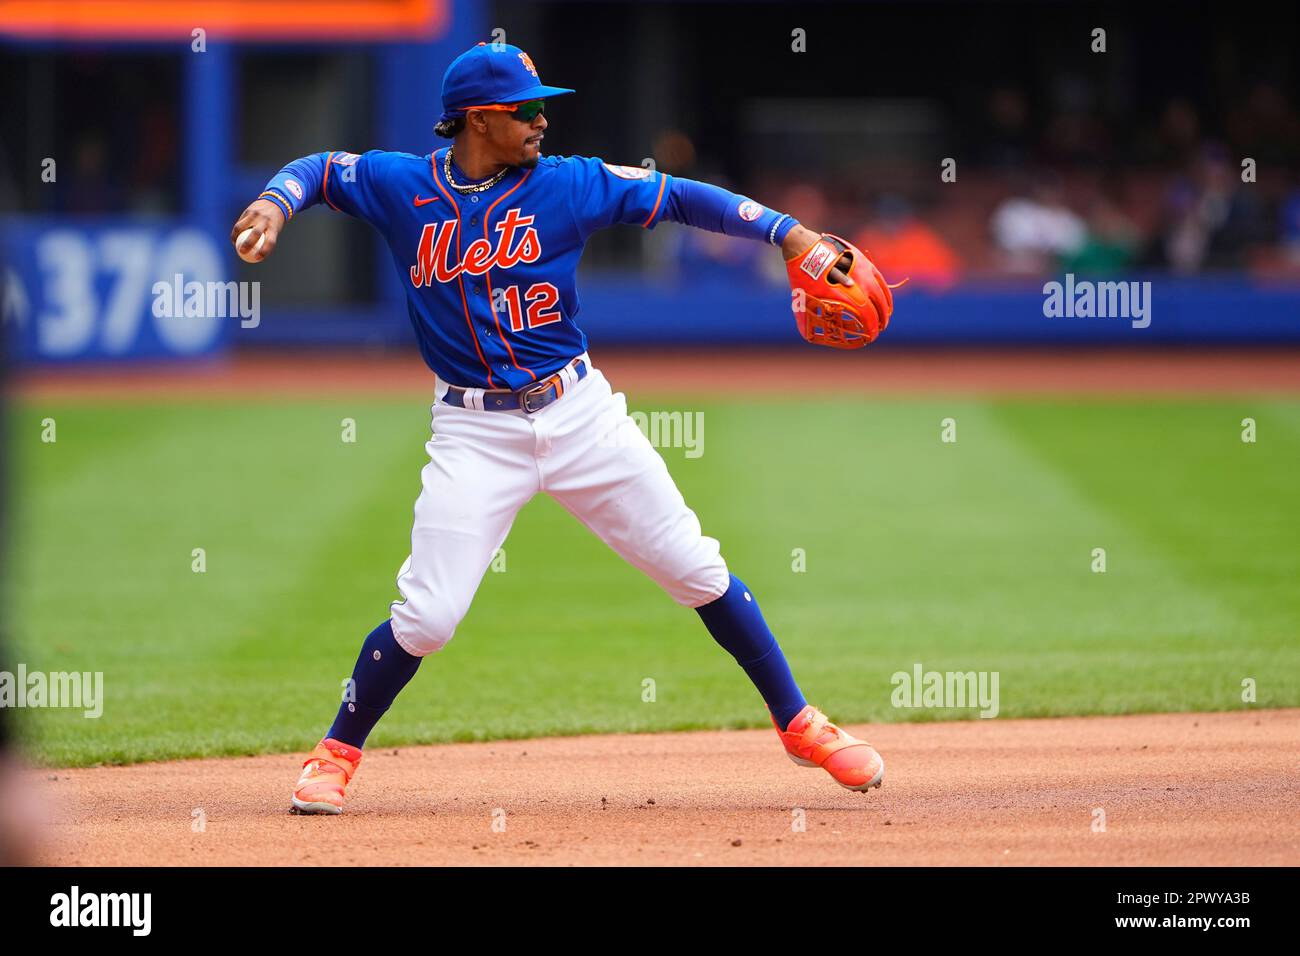 FLUSHING, NY - MAY 01: New York Mets Shortstop Francisco Lindor (12) throws  out Atlanta Braves Shortstop Vaughn Grissom (18) (not pictured) after  fielding a ground ball during the first inning of